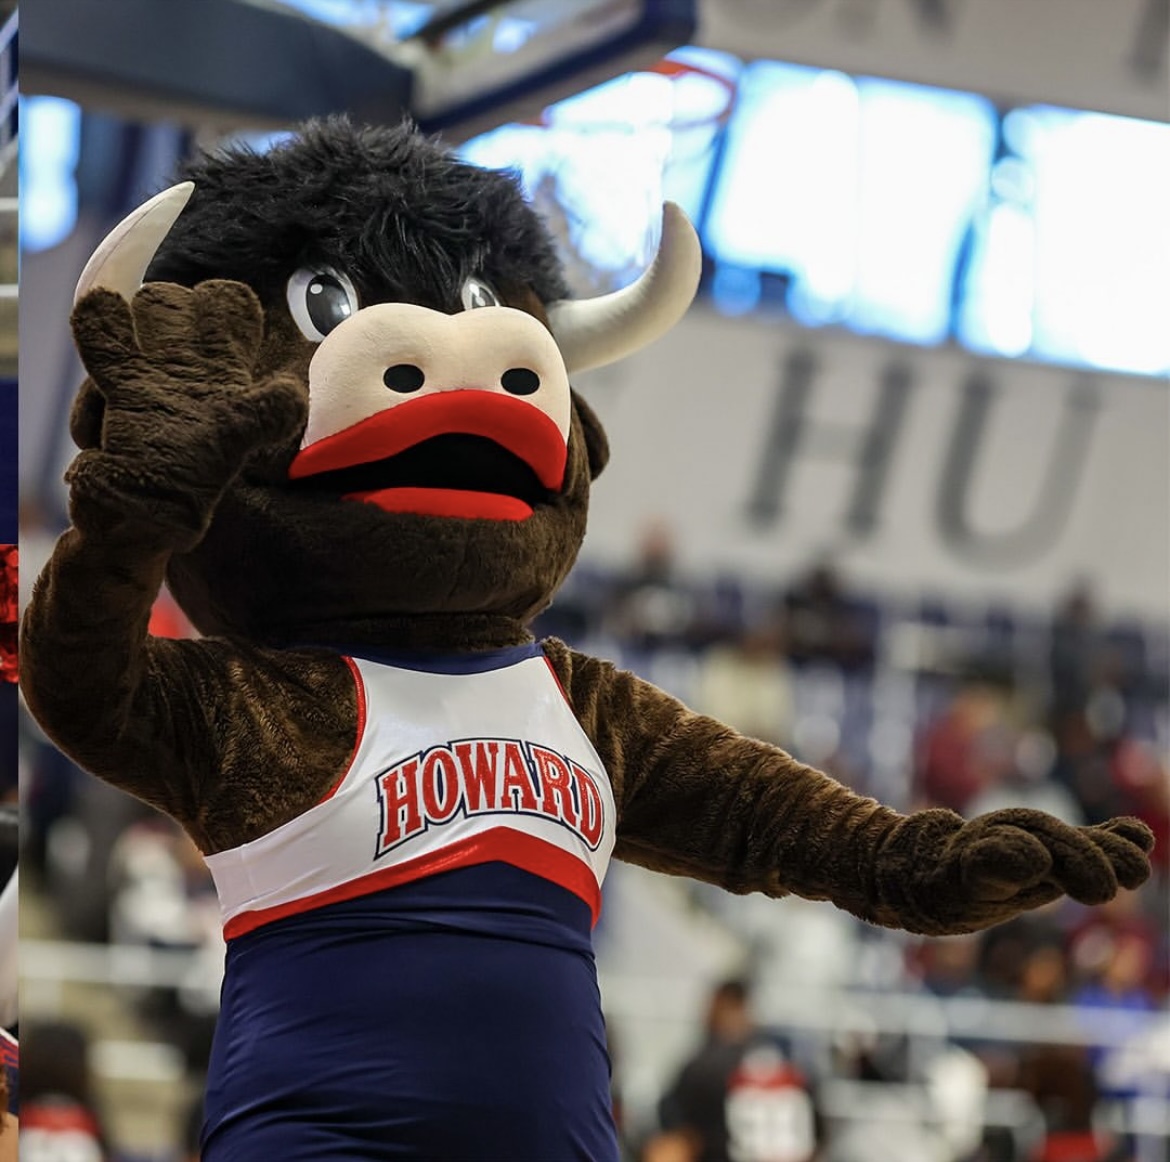 Behind the Scenes With Howard University’s Bison Mascot